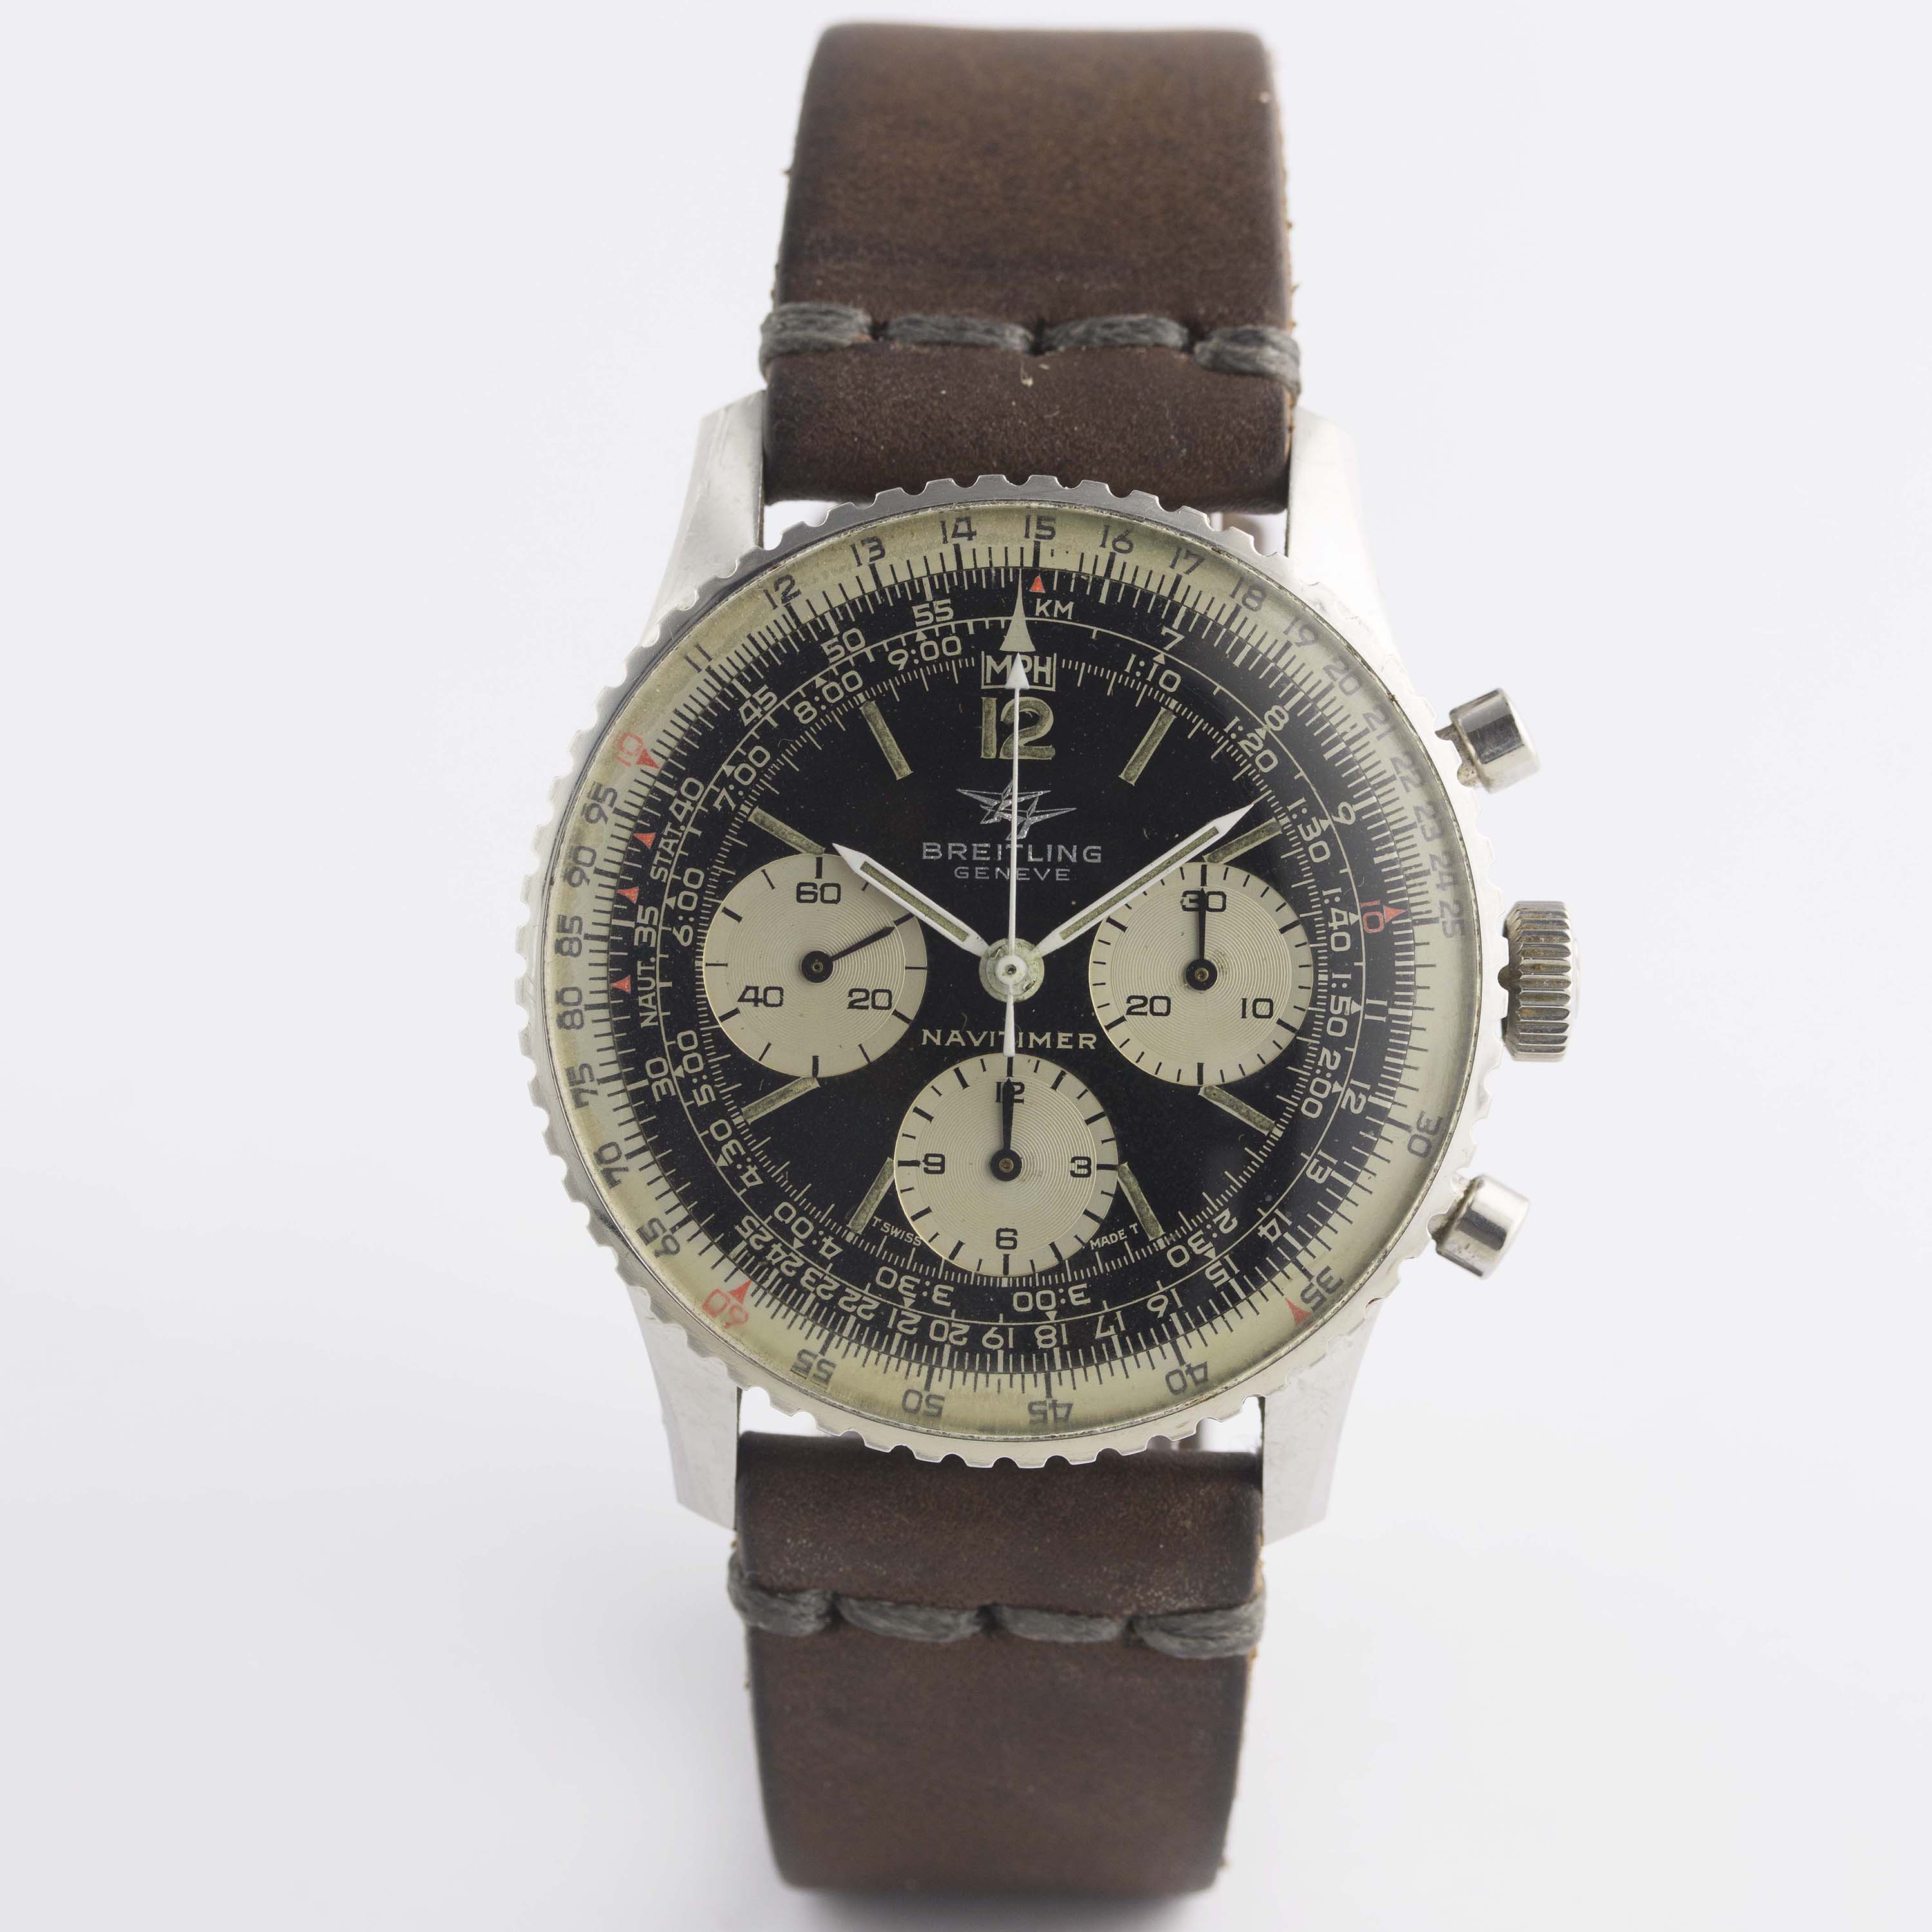 A GENTLEMAN'S STAINLESS STEEL BREITLING NAVITIMER CHRONOGRAPH WRIST WATCH CIRCA 1969, REF. 806 - Image 3 of 11